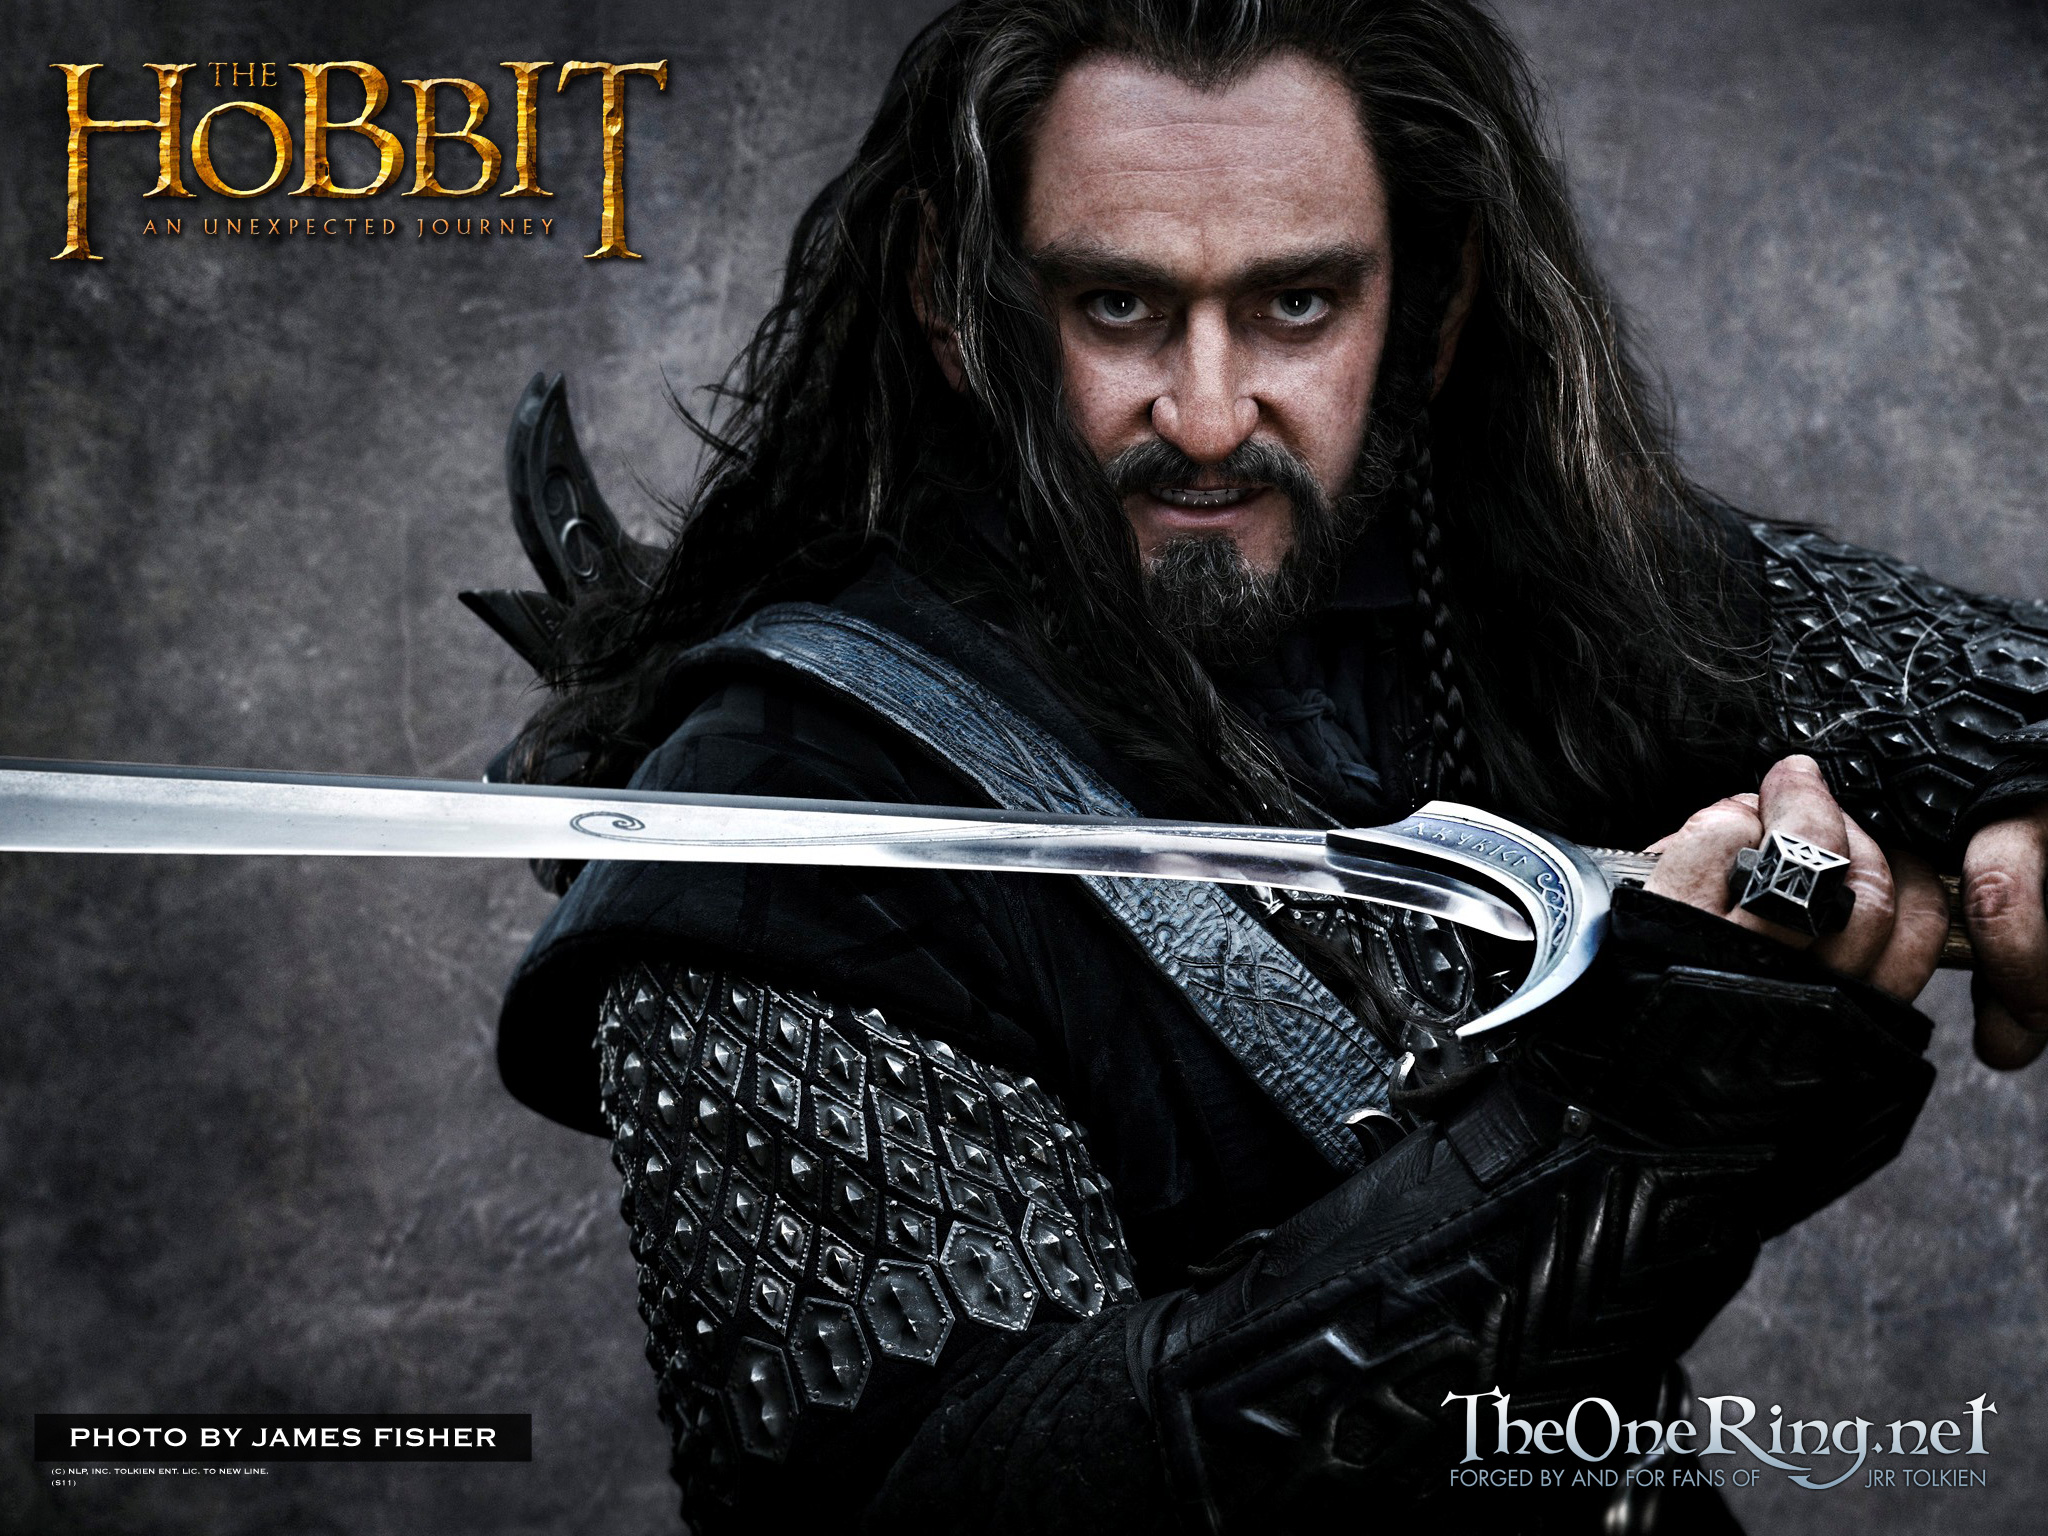 Verplicht Omgekeerd Betekenisvol The Hobbit Movie Dwarf Listing - First Look at Richard Armitage as Thorin |  Lord of the Rings Rings of Power on Amazon Prime News, JRR Tolkien, The  Hobbit and more | TheOneRing.net